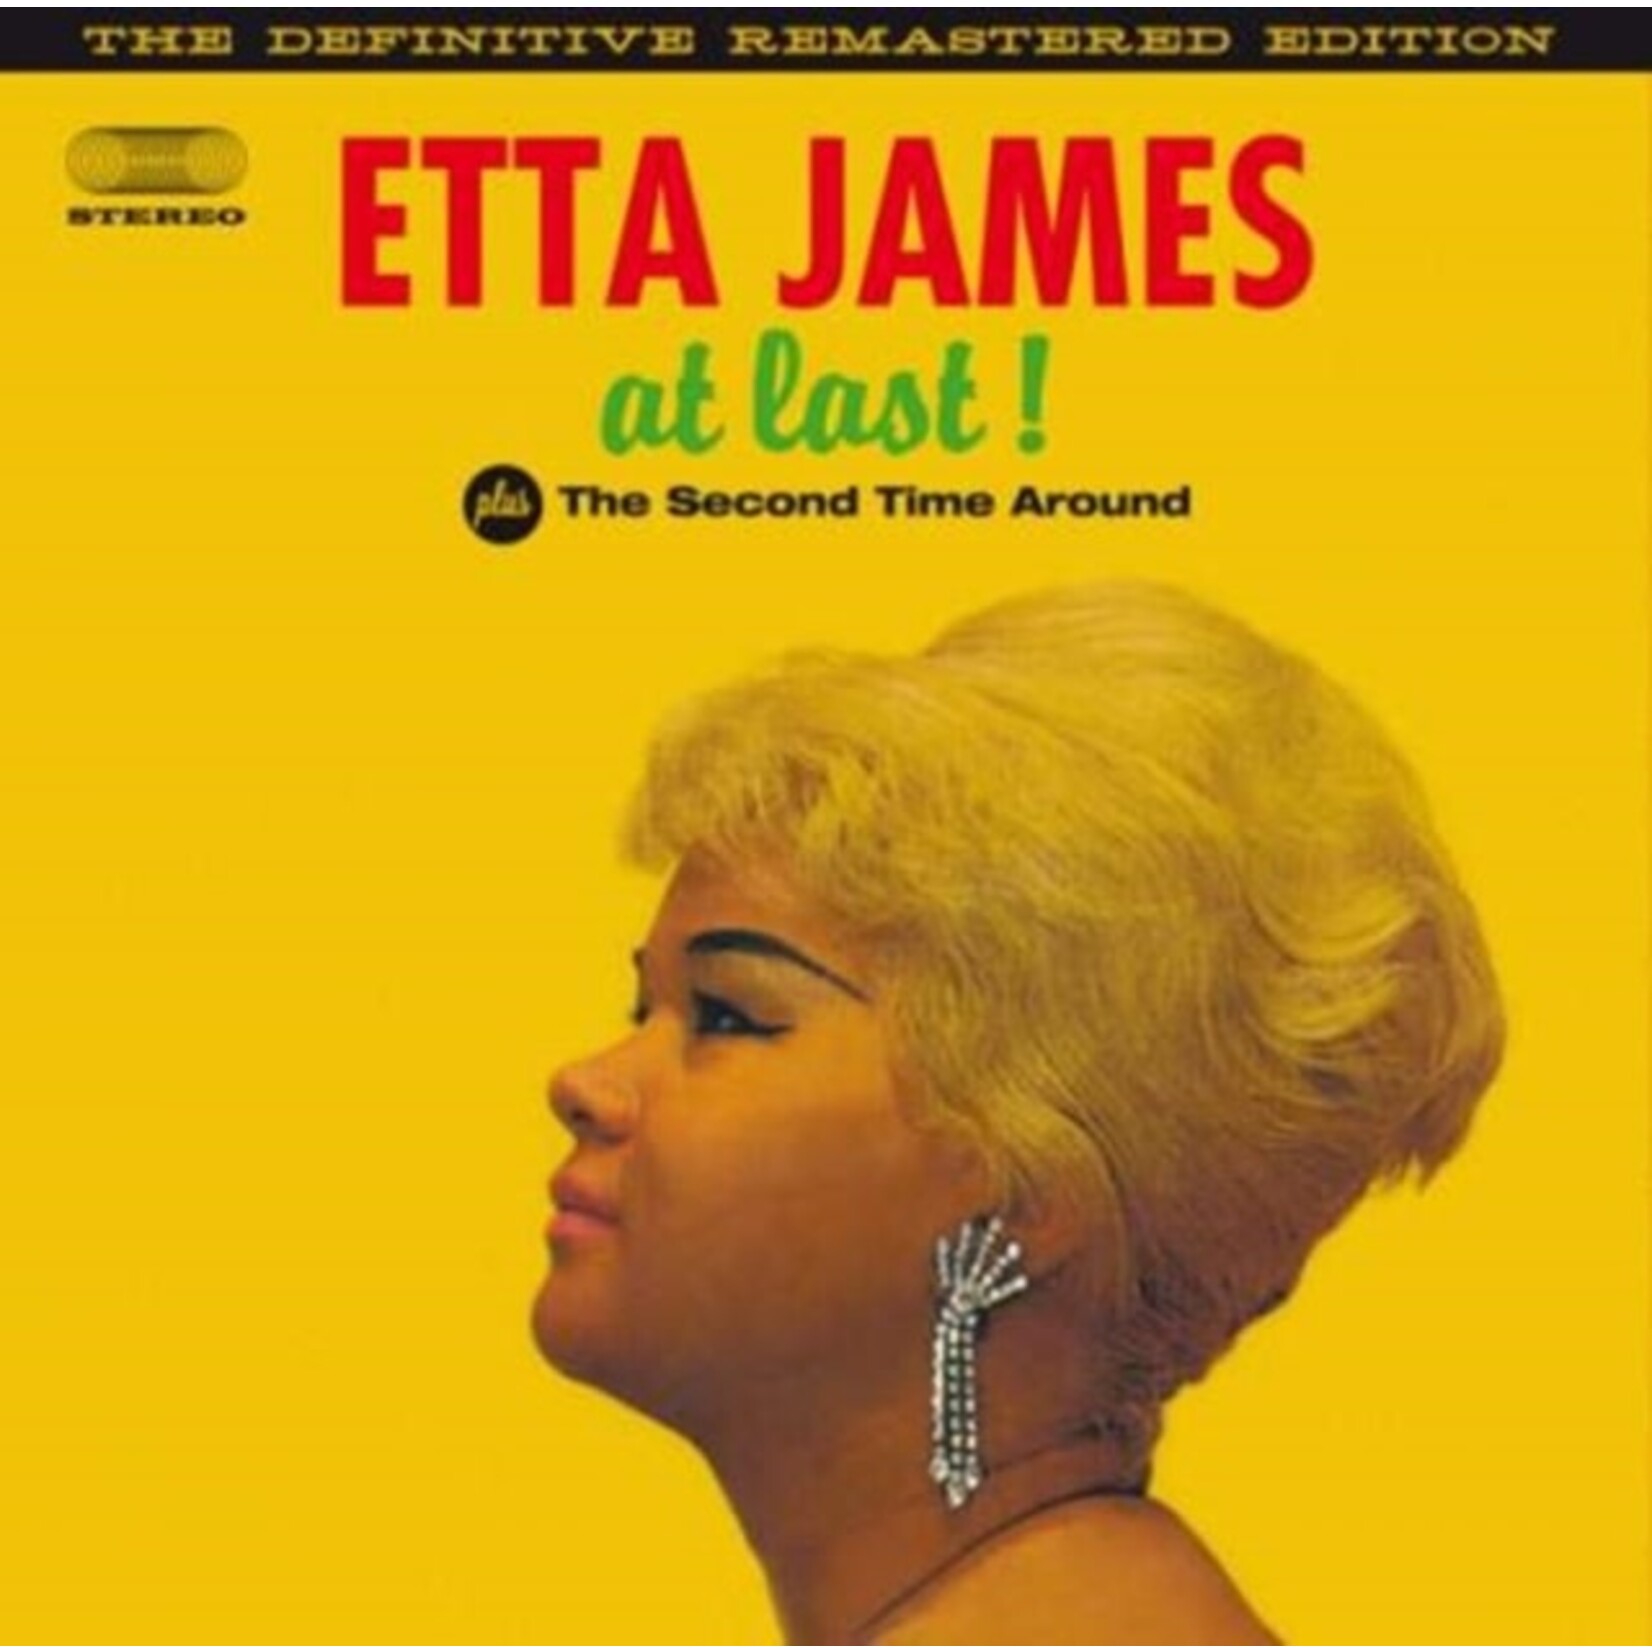 Etta James - At Last!/The Second Time Around [CD]